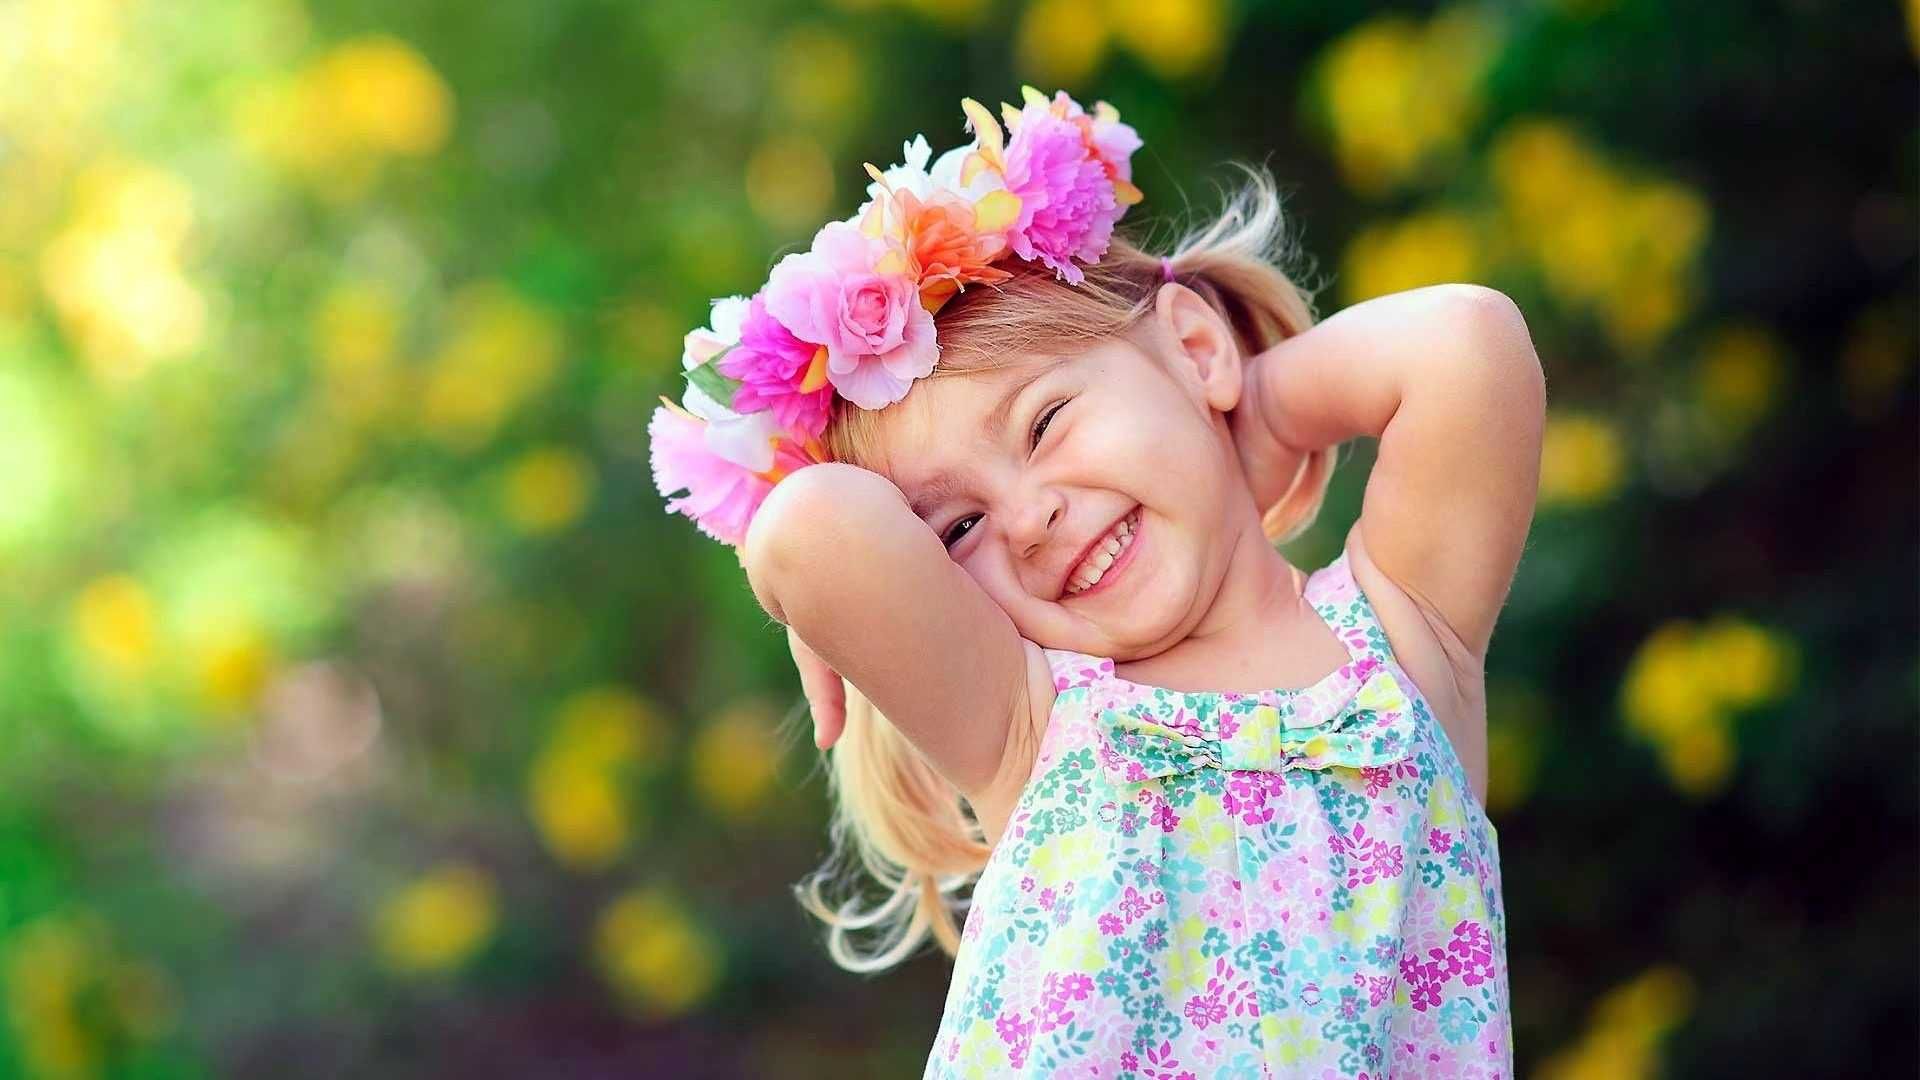 Laughing Babies Wallpaper HD Best Collection Of Cute Babies. Cute small girl, Baby wallpaper, Cute kids photo